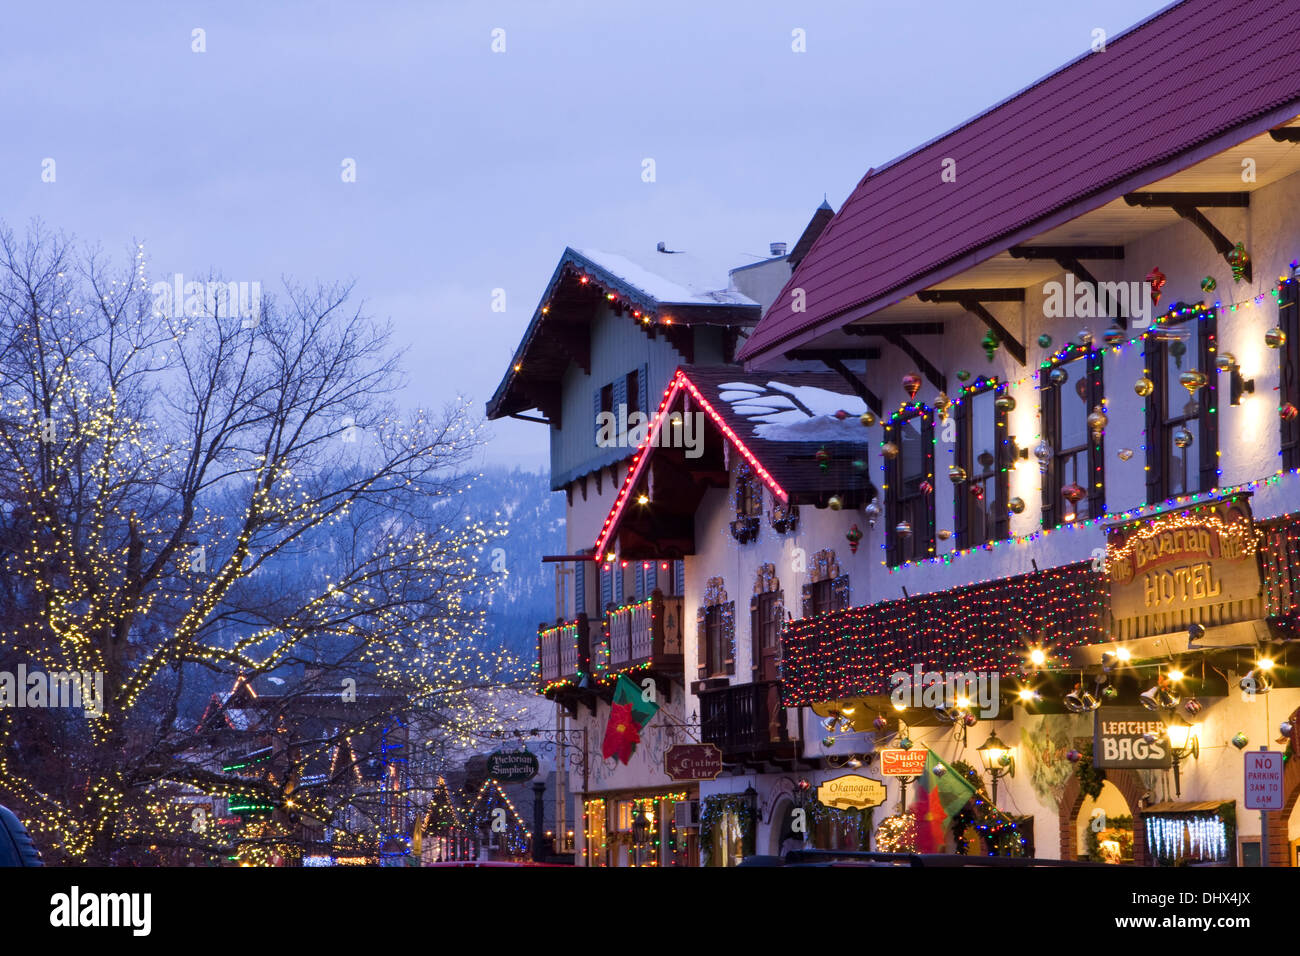 The town of Leavenworth decorated in Christmas lights for the holiday season, Washington. Stock Photo